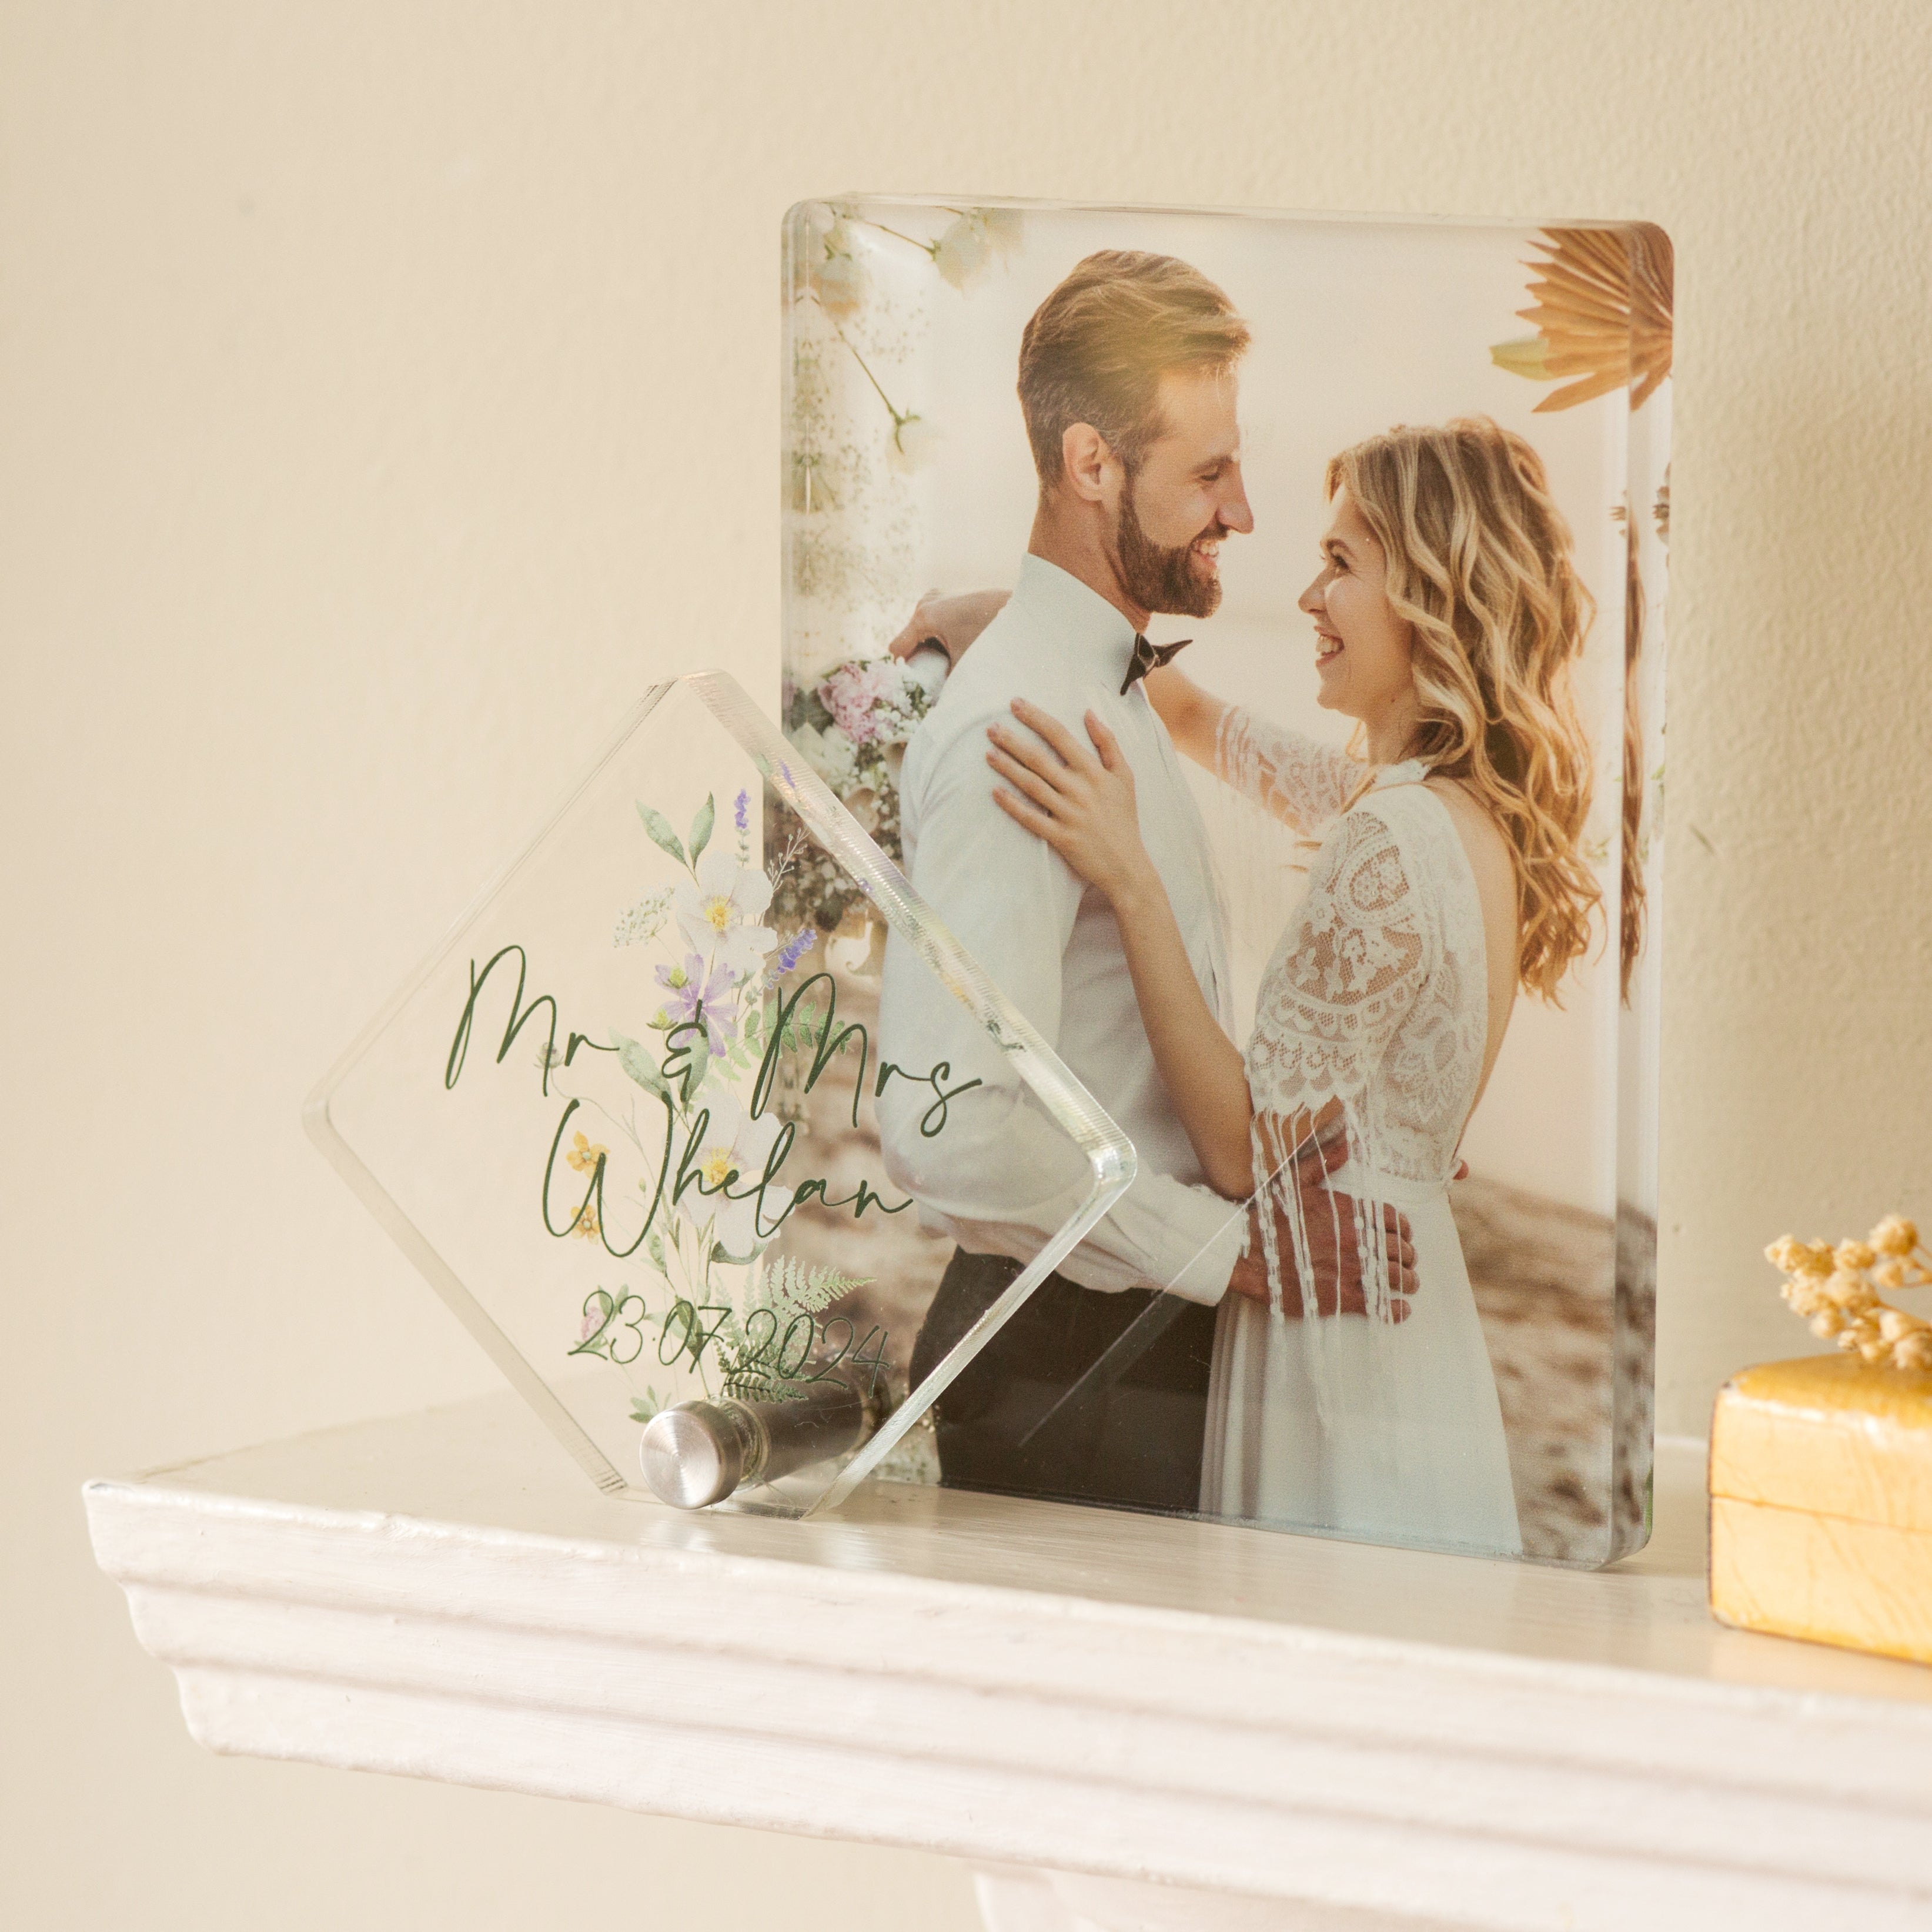 freestanding anniversary photo acrylic stand on a fireplace